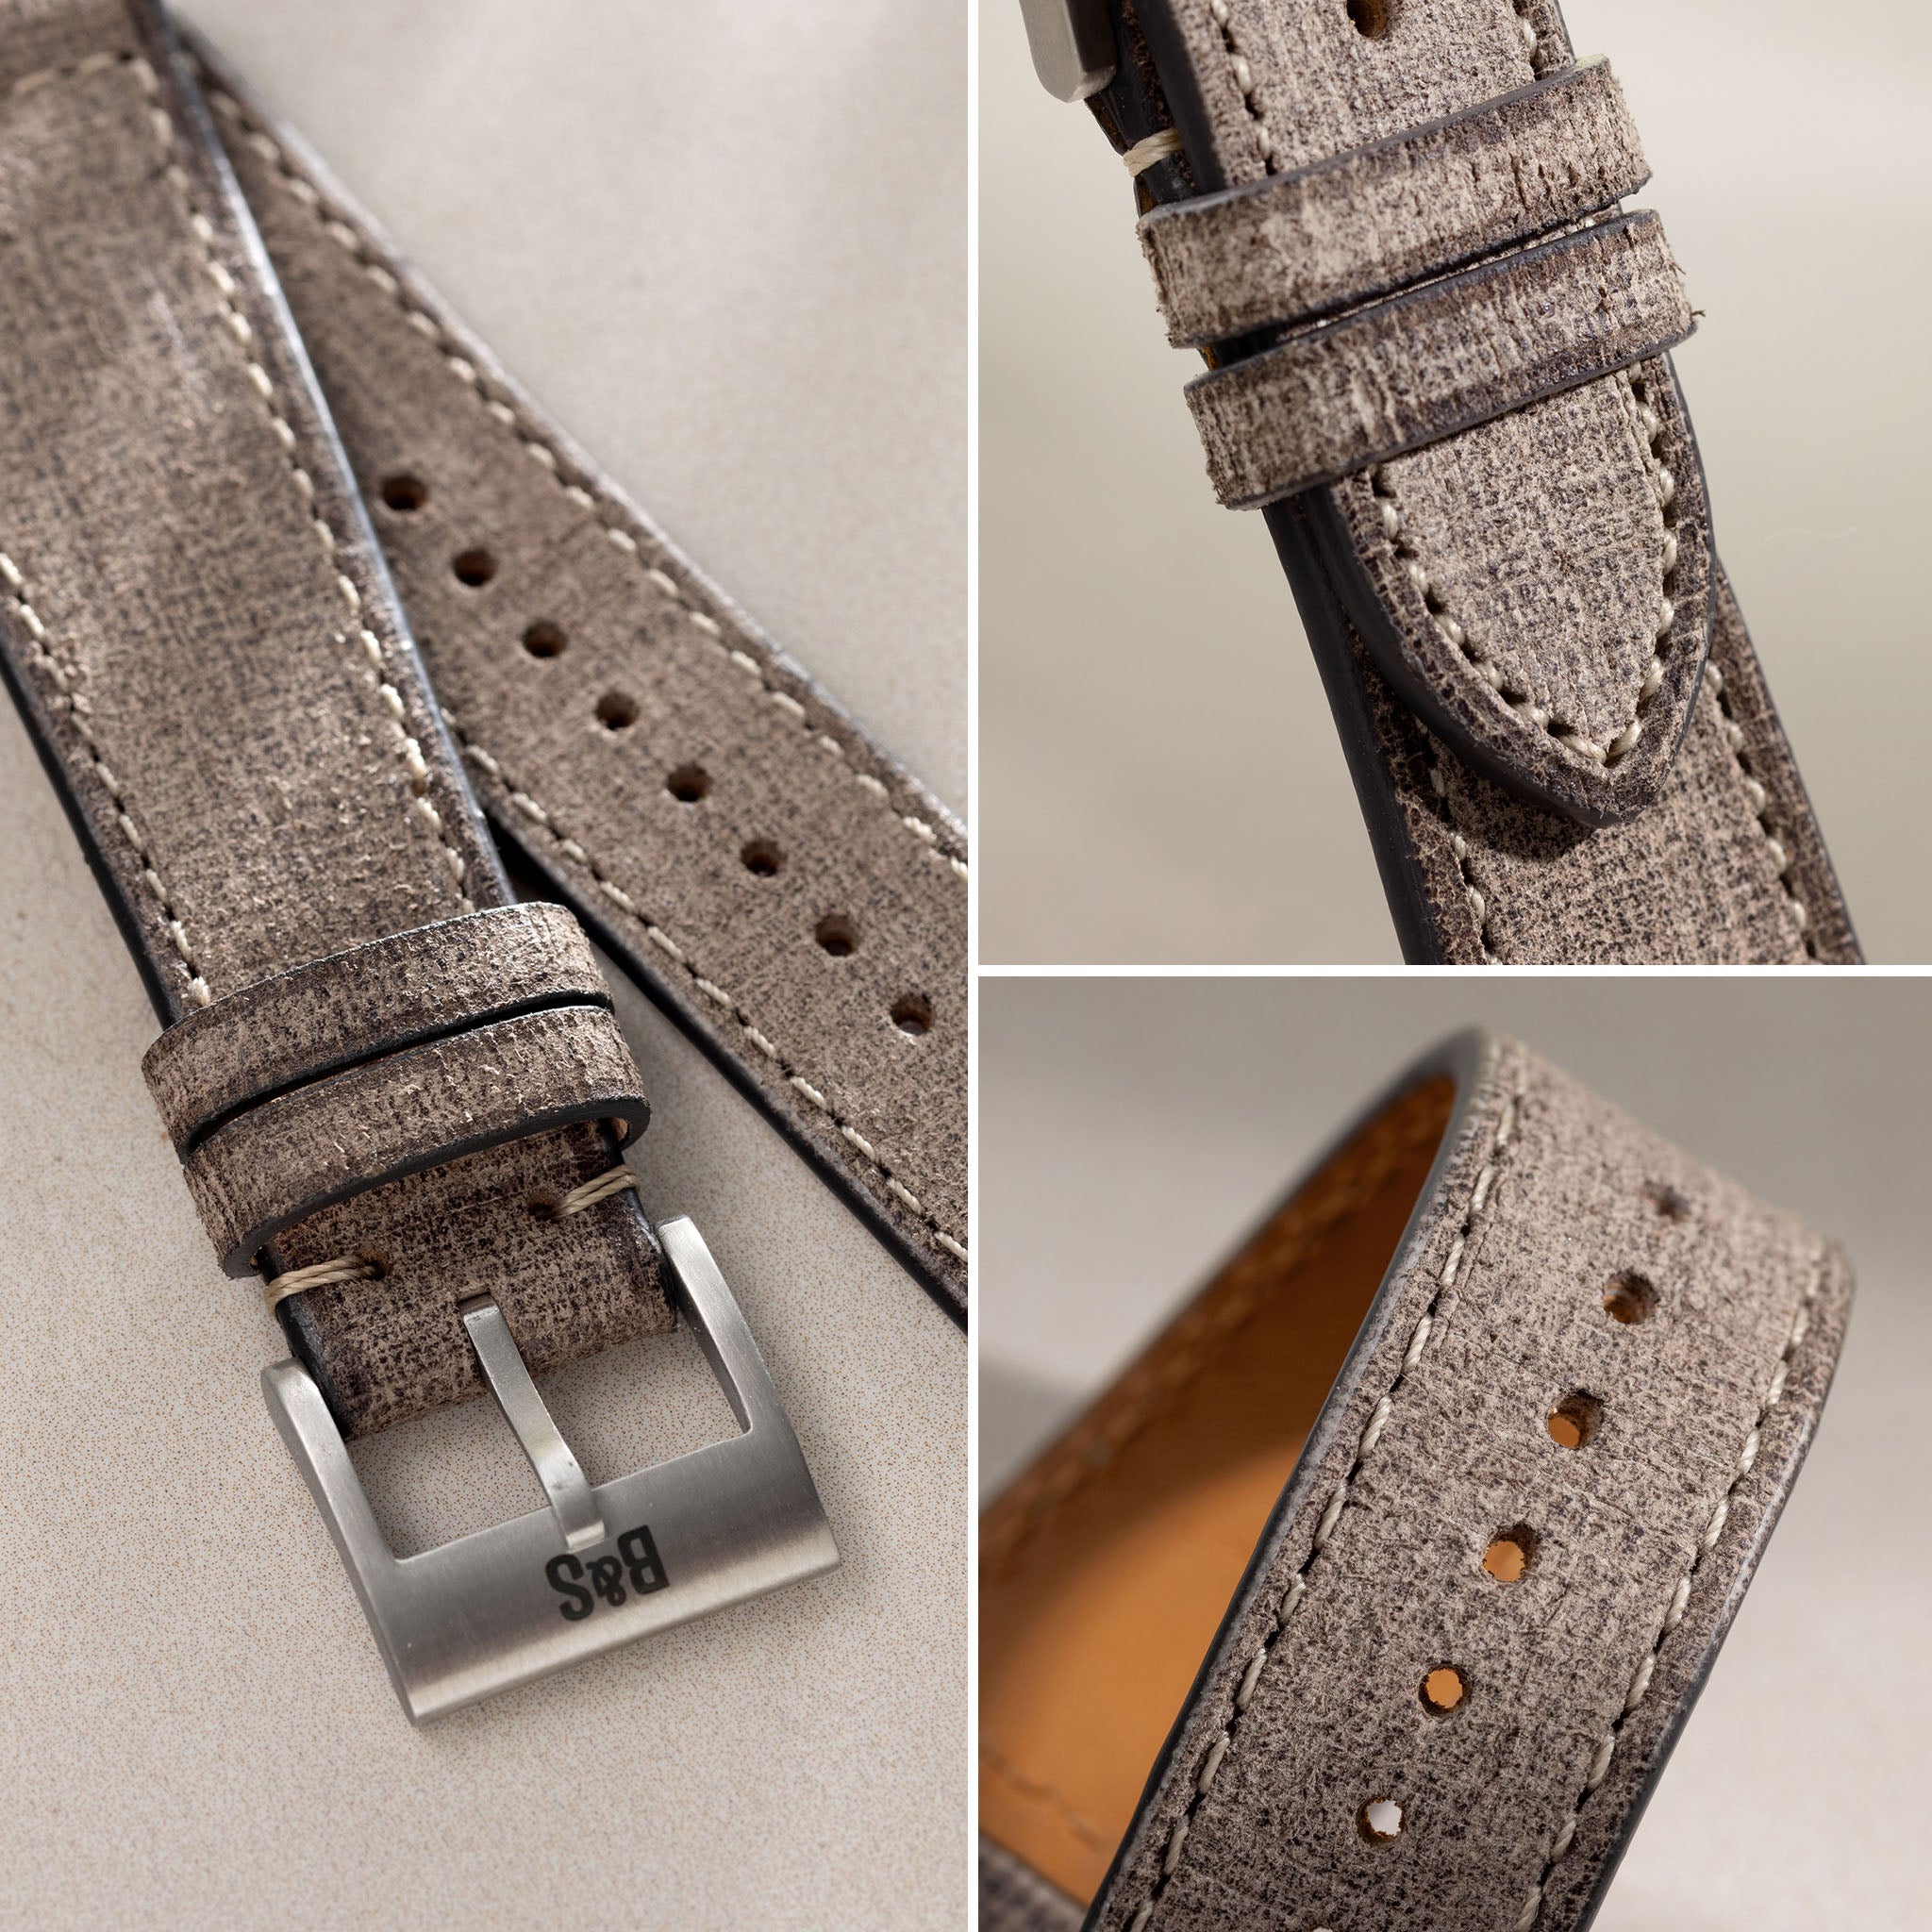 Linen Boxed Leather Watch Strap - Elegant Grey